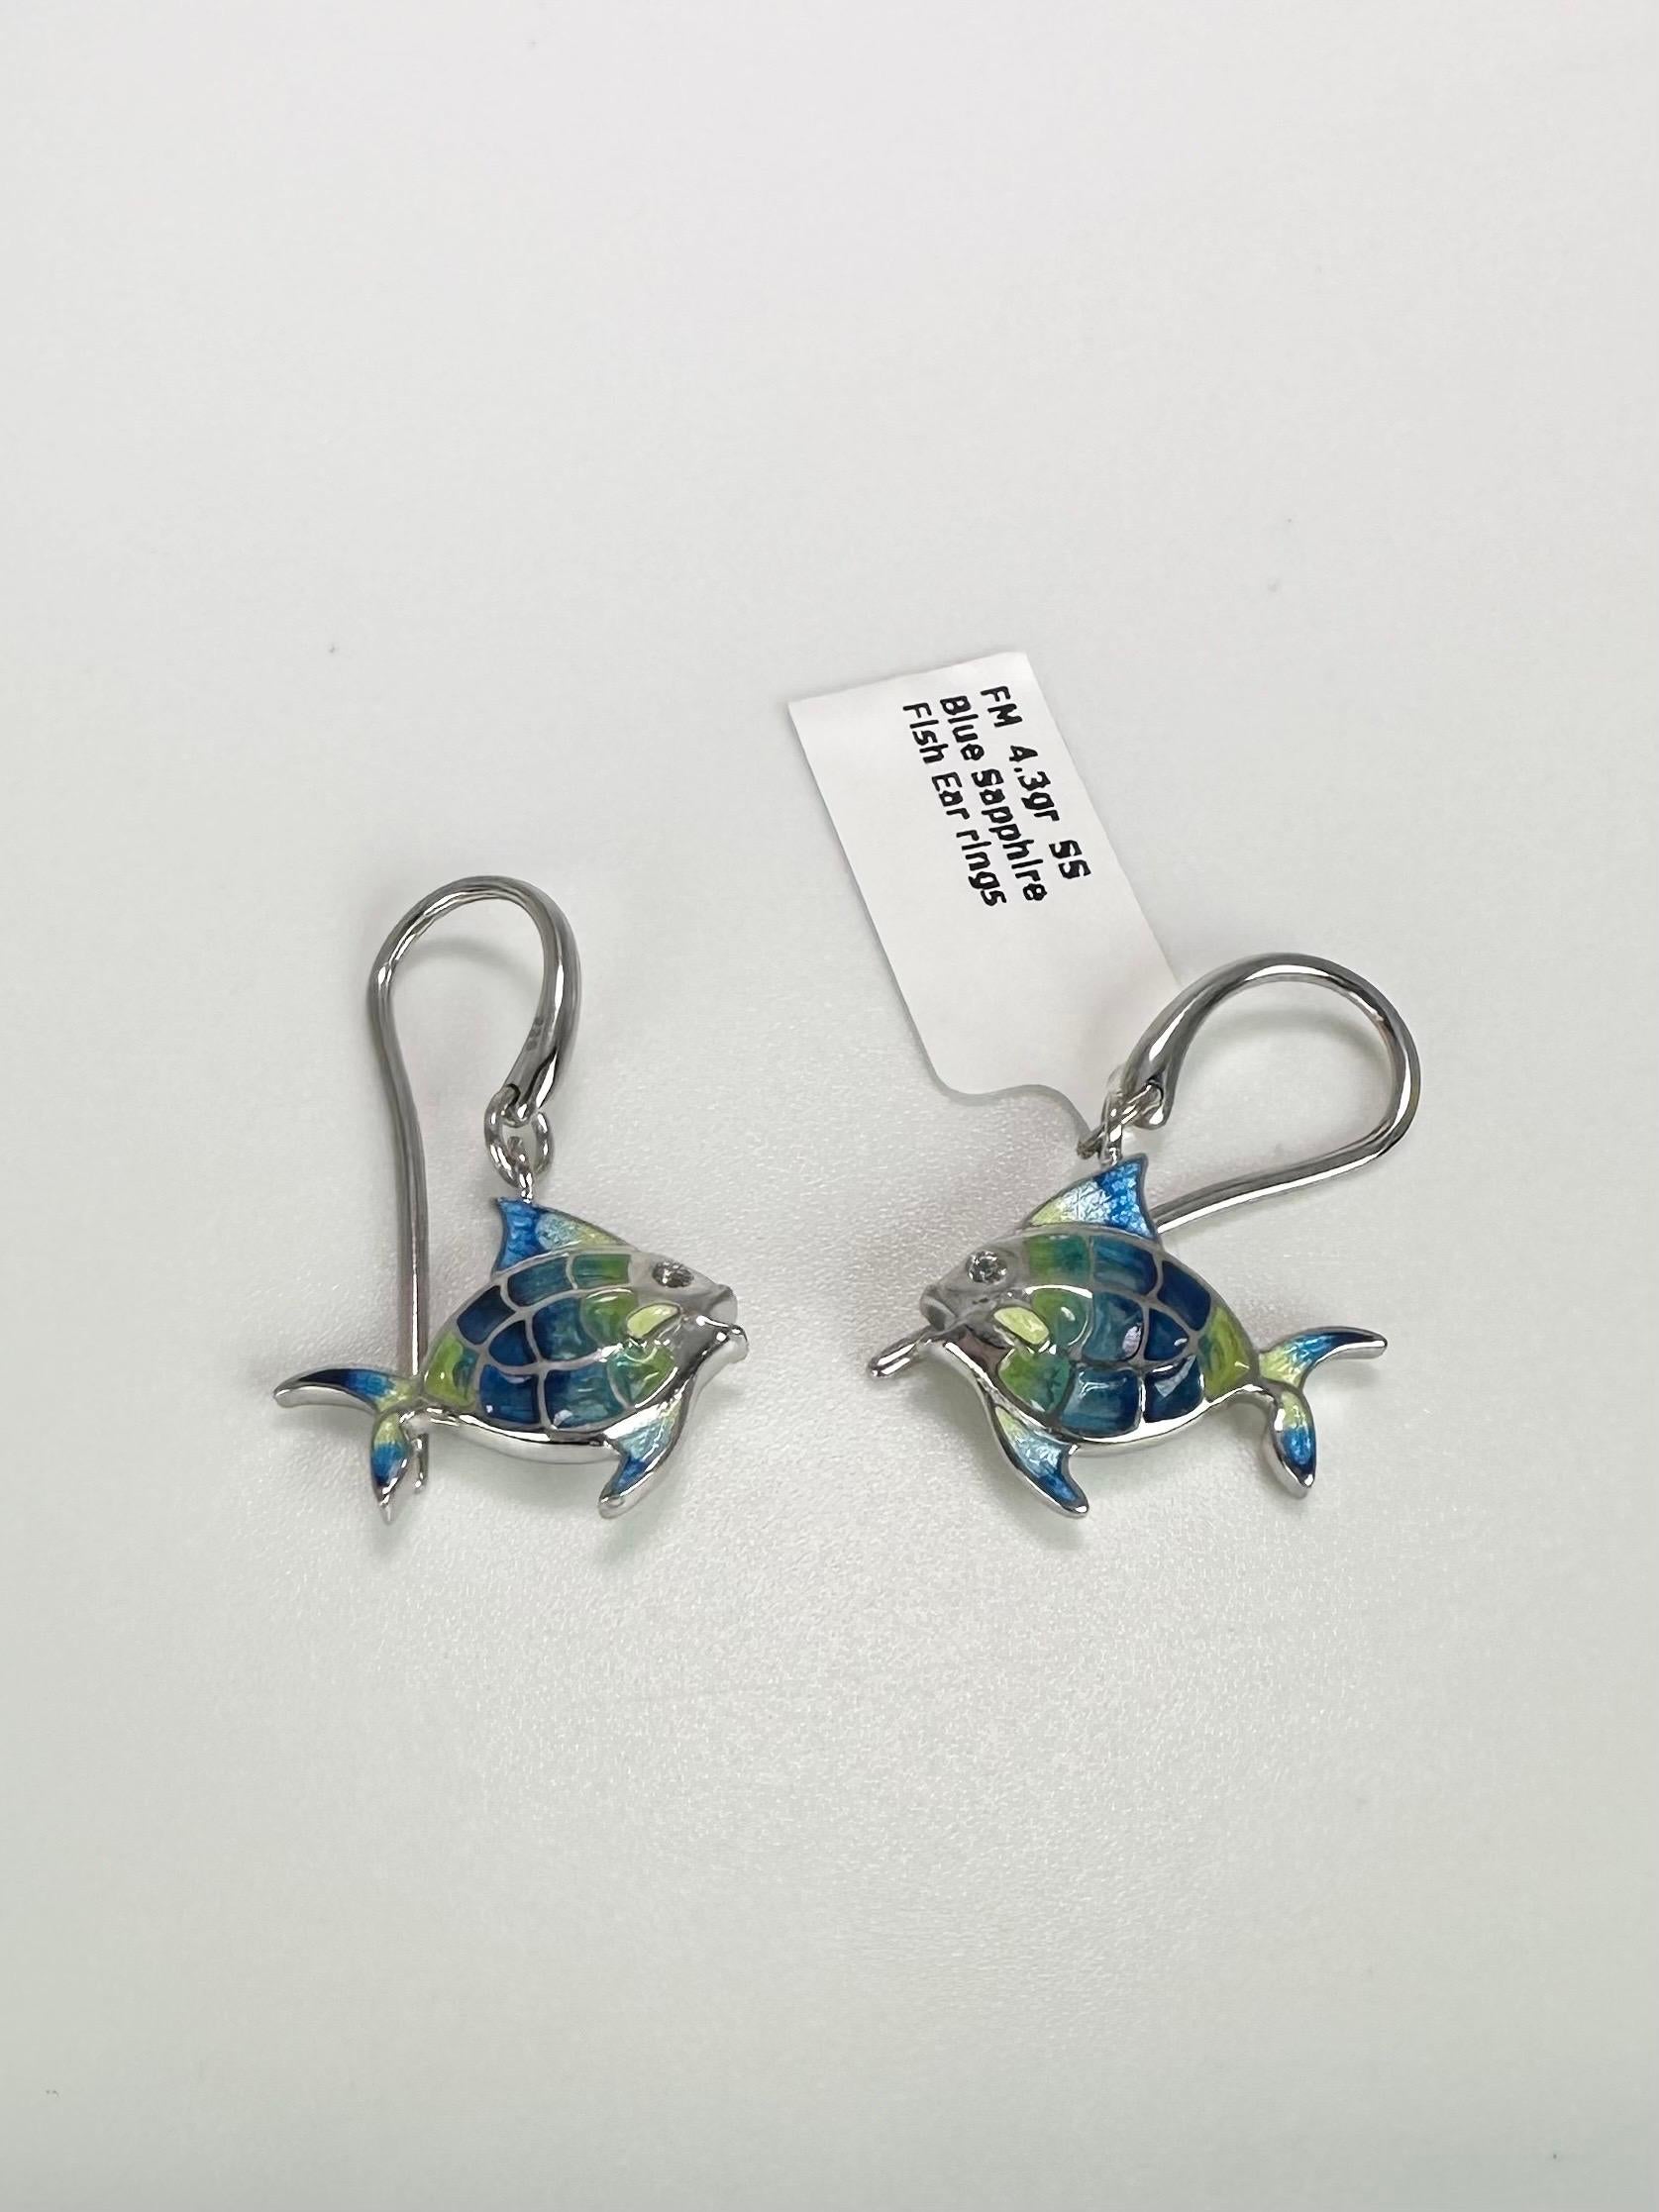 Fish diamond earrings made with enamel in silver, stamped 925 with natural diamonds, comes with certificate of authenticity.

WHAT YOU GET AT STAMPAR JEWELERS:
Stampar Jewelers, located in the heart of Jupiter, Florida, is a custom jewelry store and